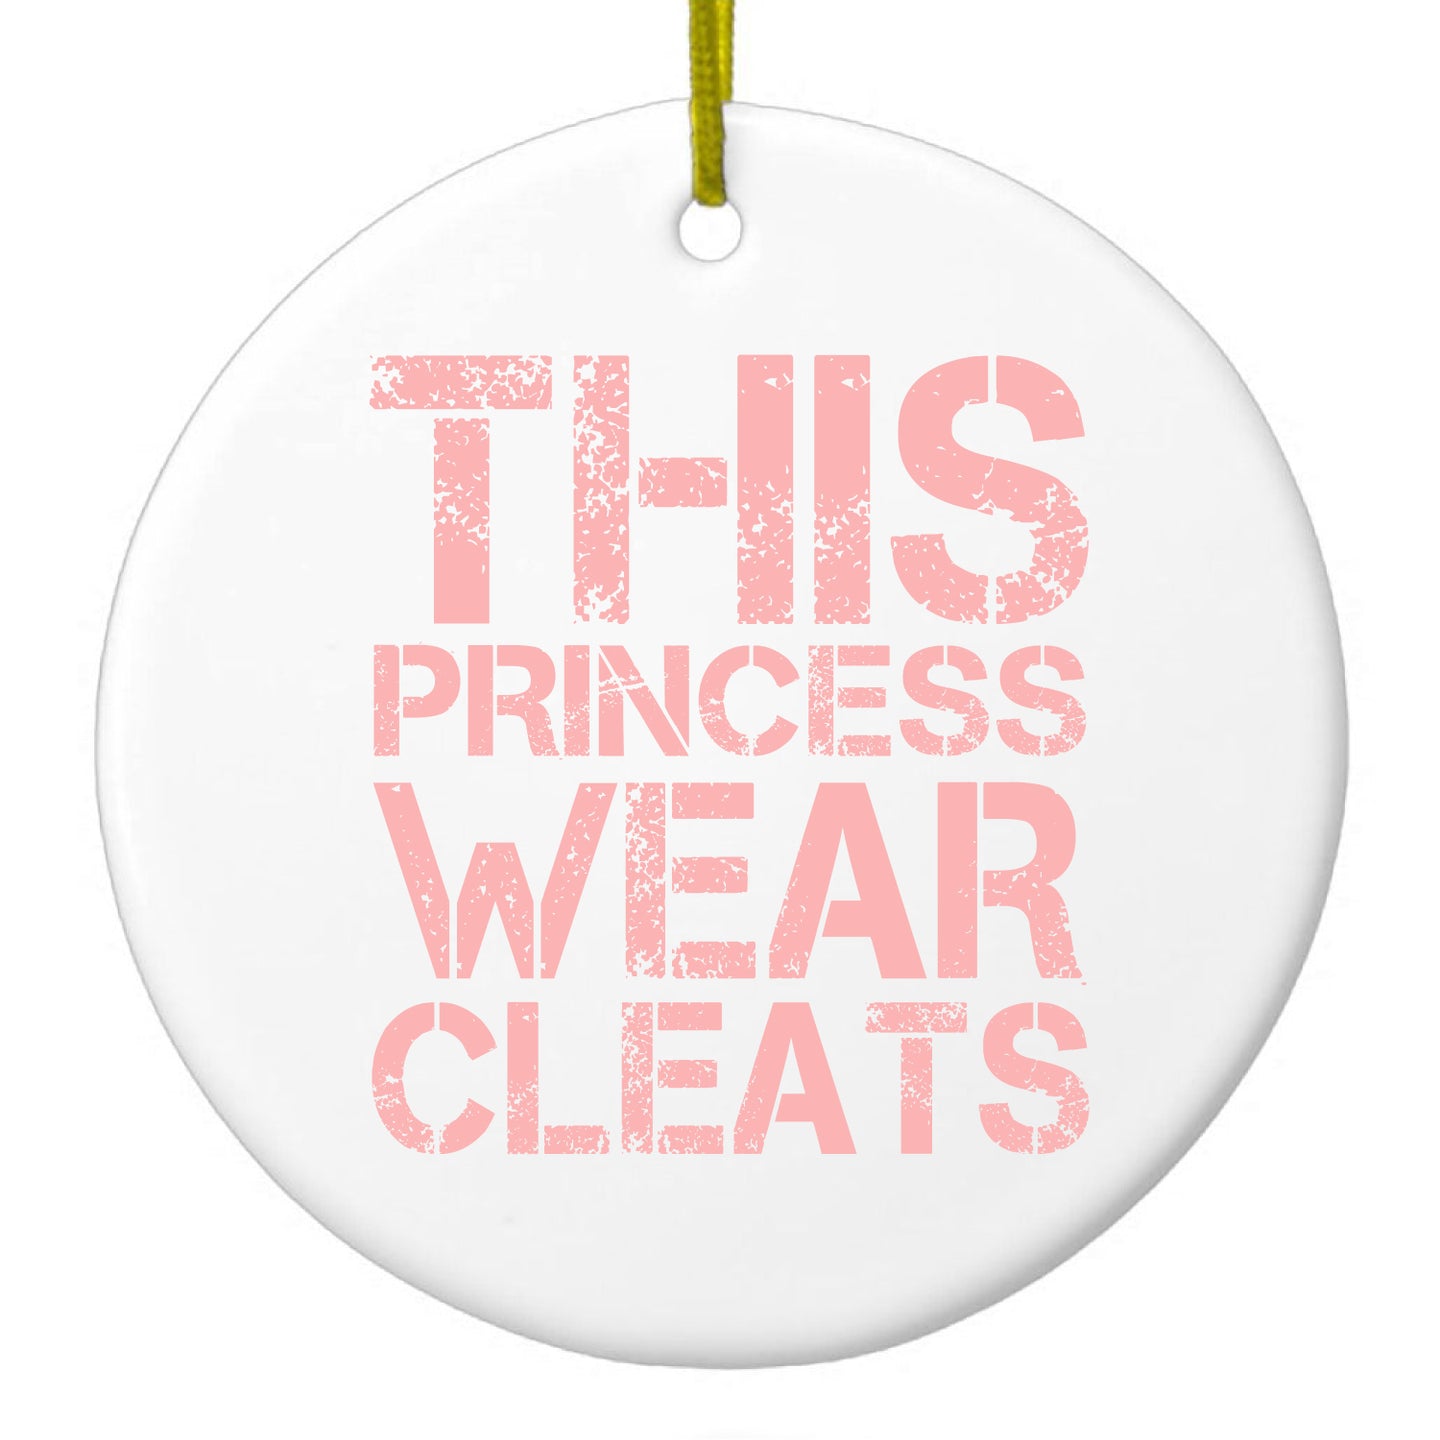 DistinctInk® Hanging Ceramic Christmas Tree Ornament with Gold String - Great Gift / Present - 2 3/4 inch Diameter - This Princess Wear Cleats